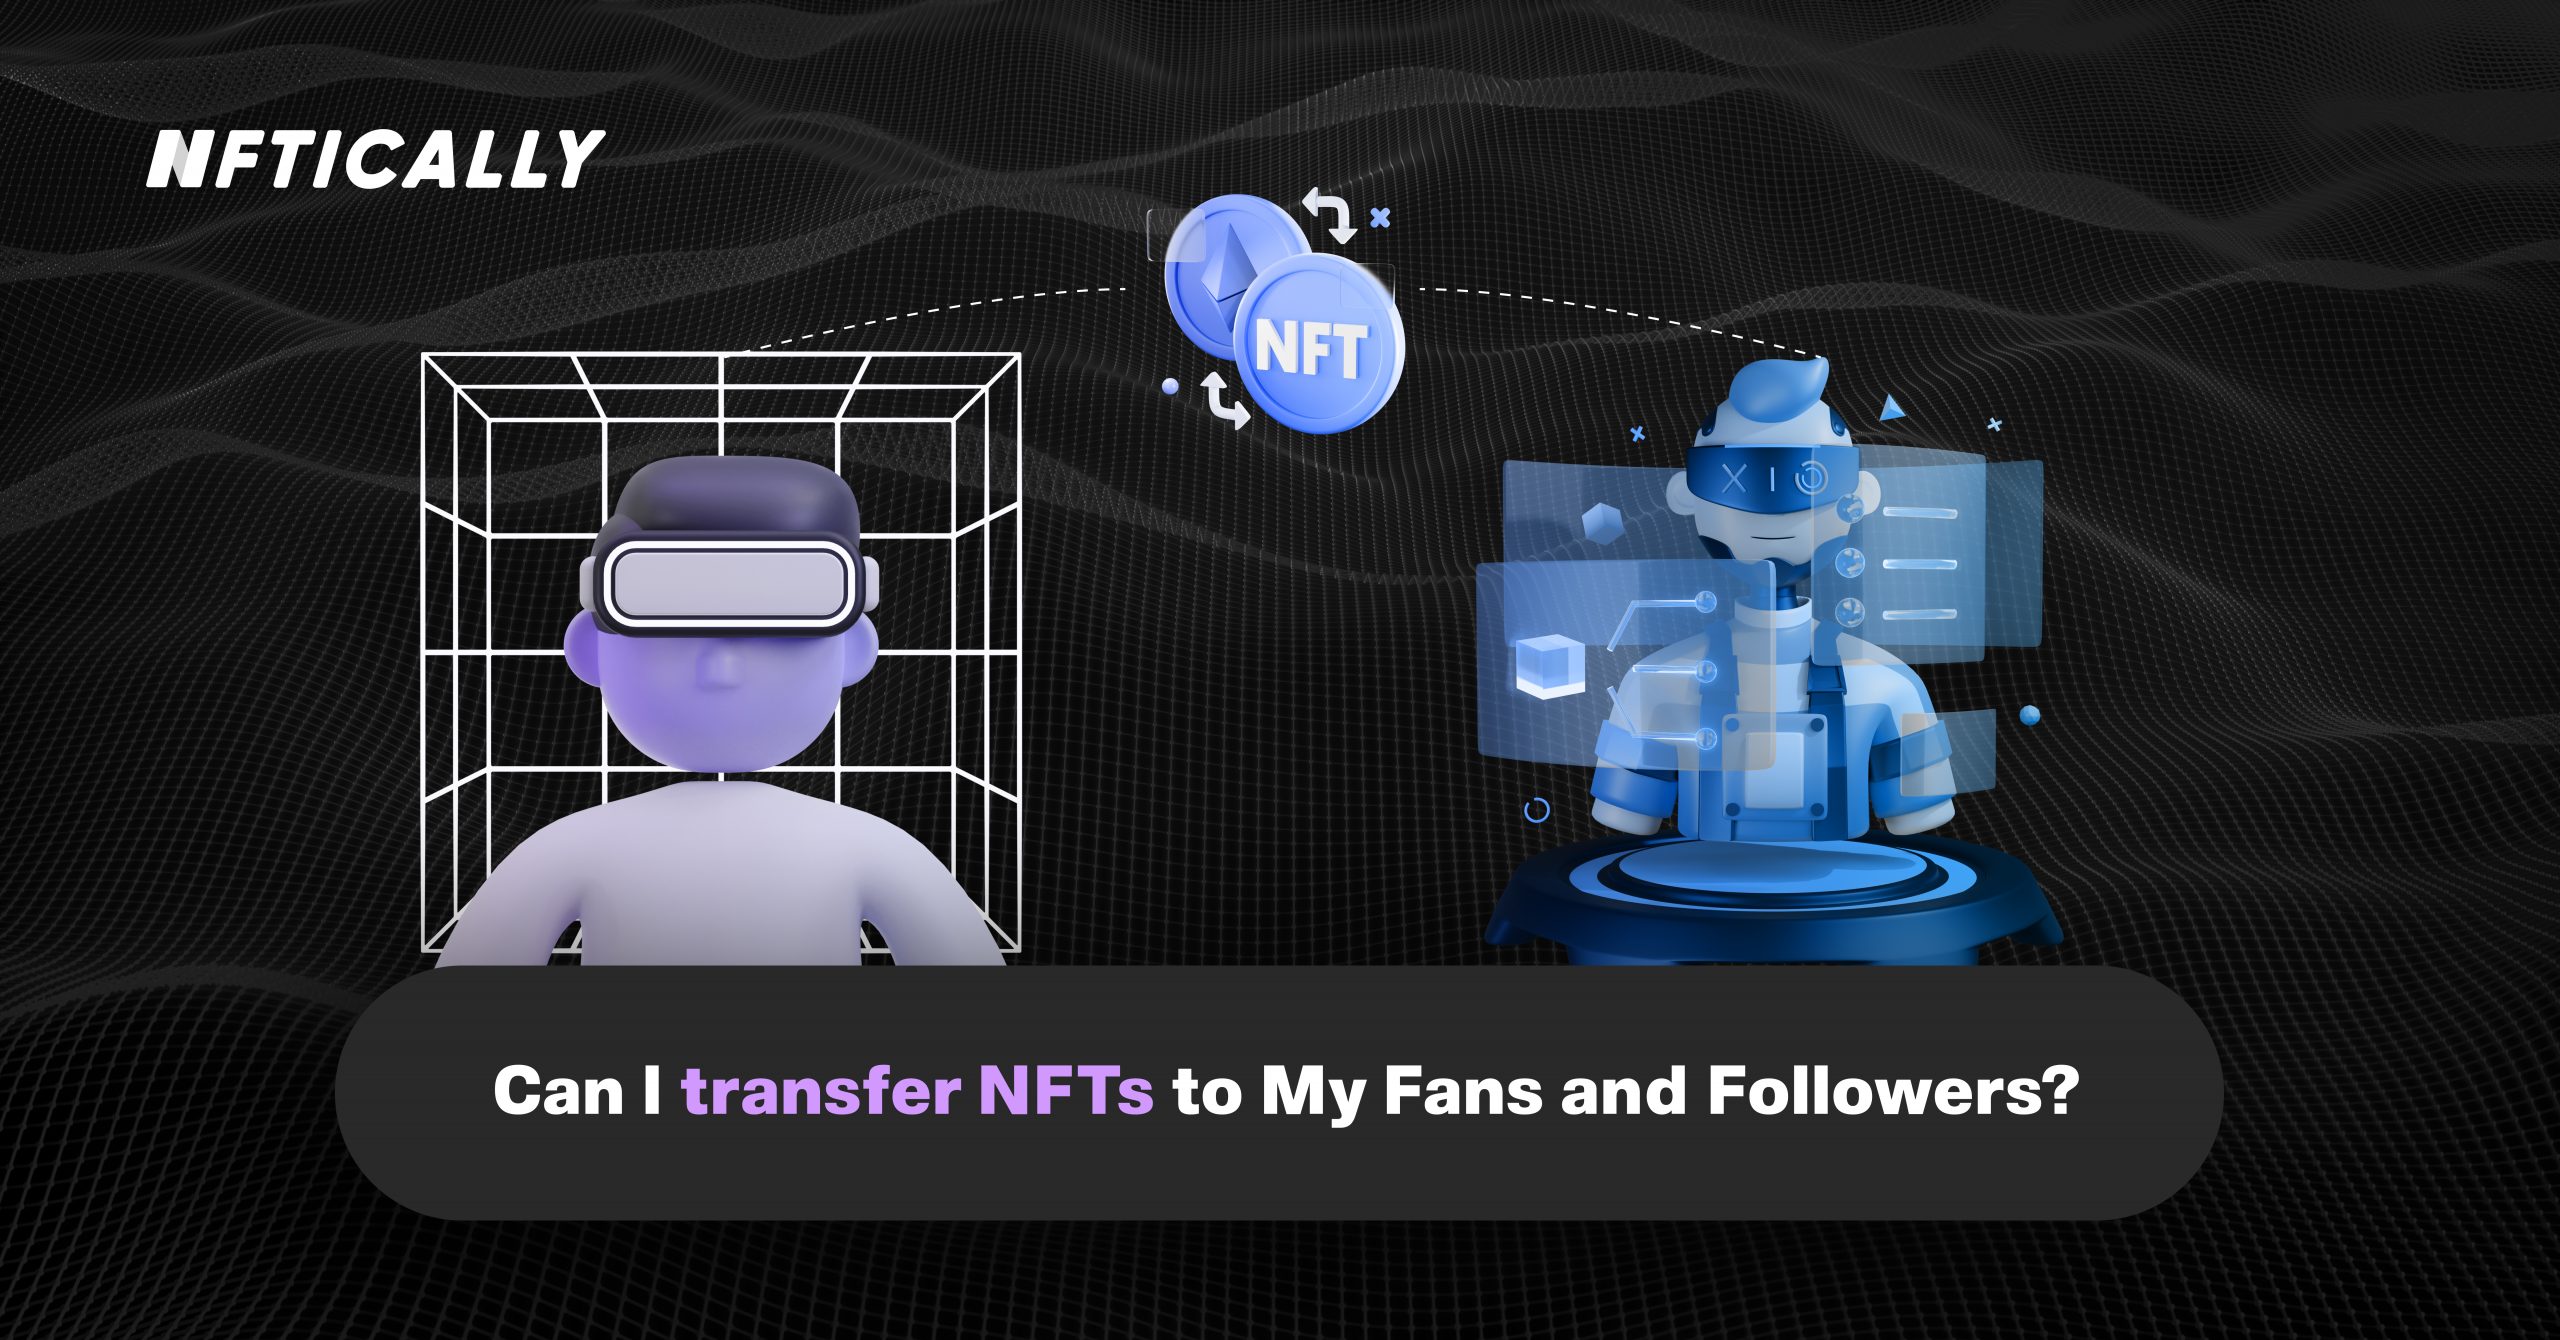 Can I Transfer NFTs to My Fans and Followers?